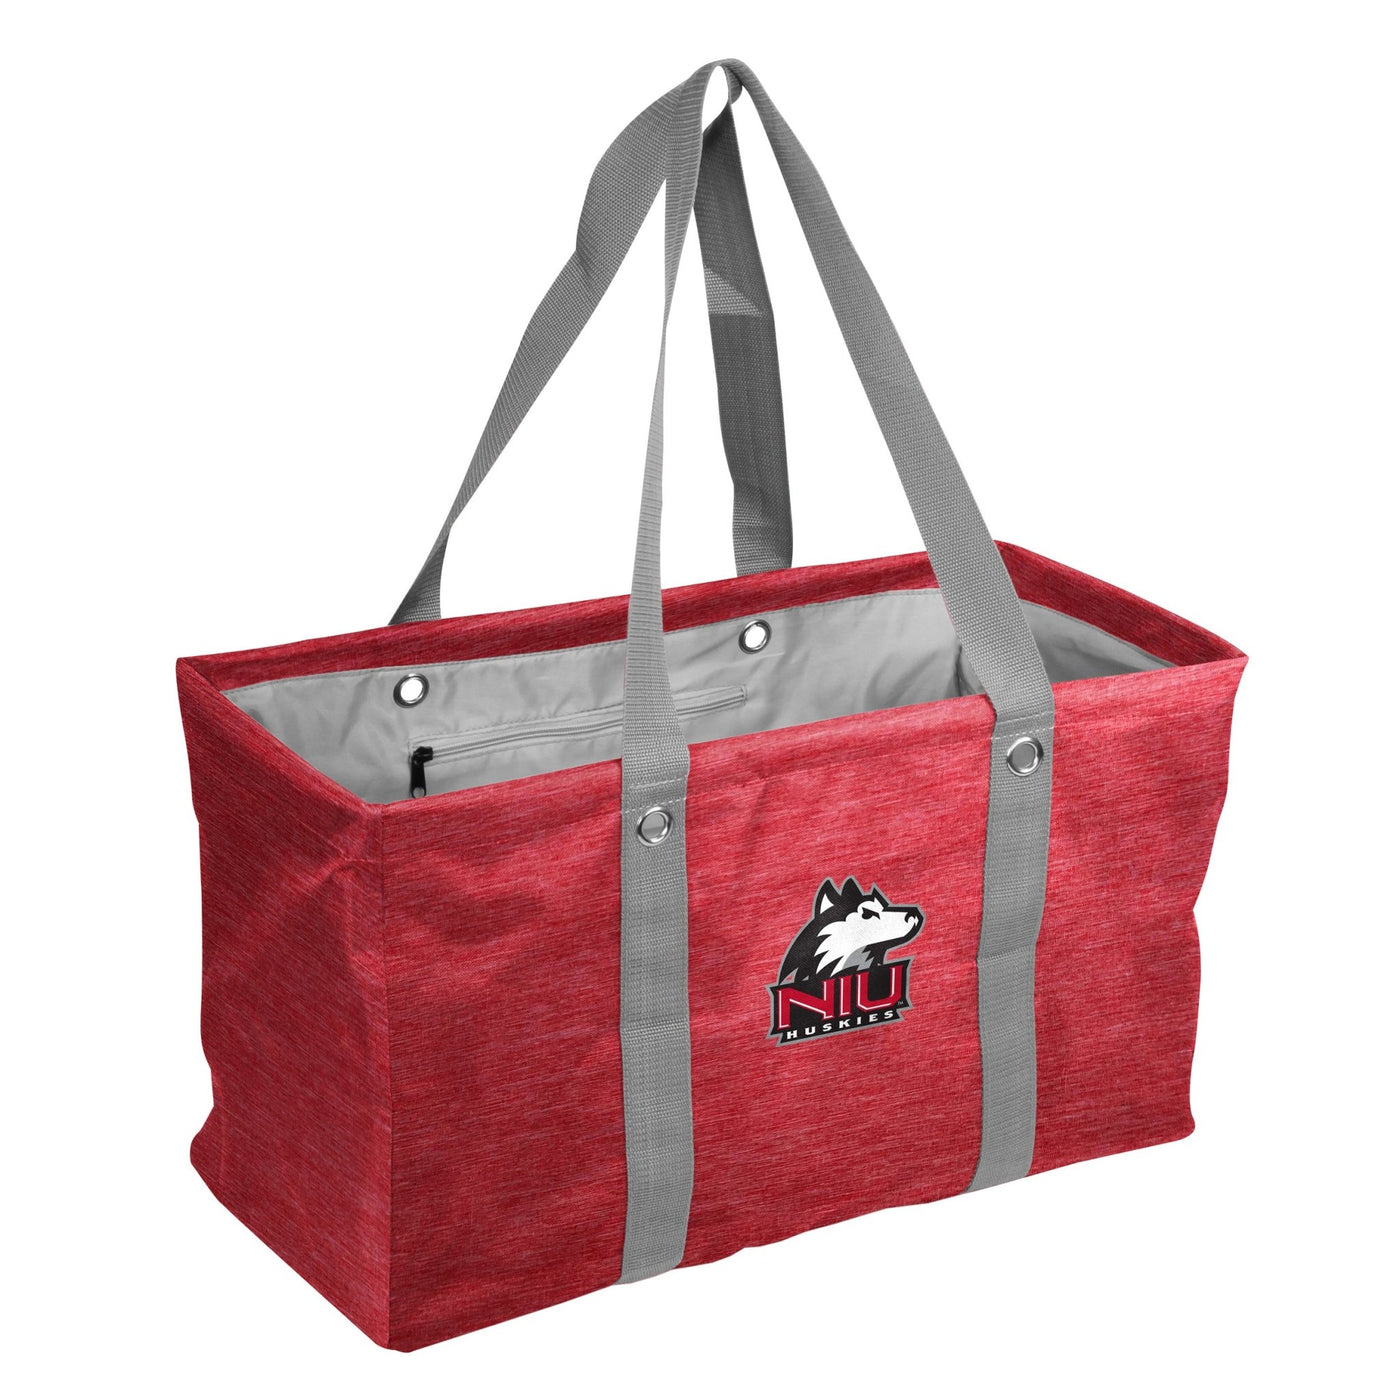 Northern Illinois Red Picnic Caddy - Logo Brands